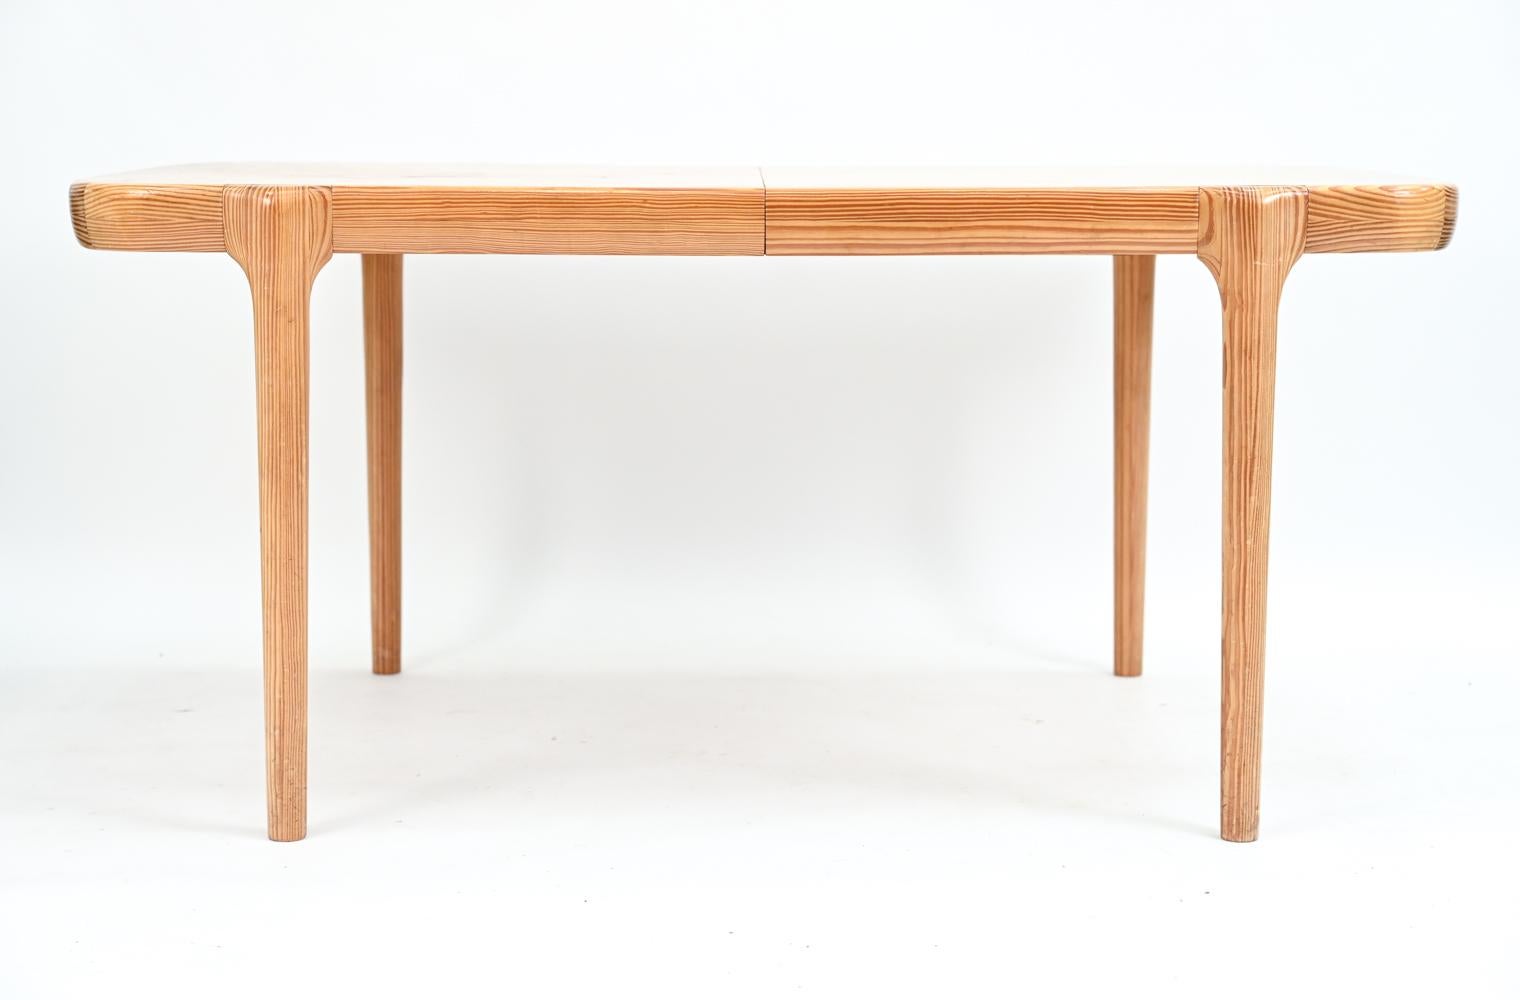 An unusual Danish mid-century dining table in pine, attributed to Niels O. Moller. No apparent manufacturer's labels present. This impressive table includes two 20.5